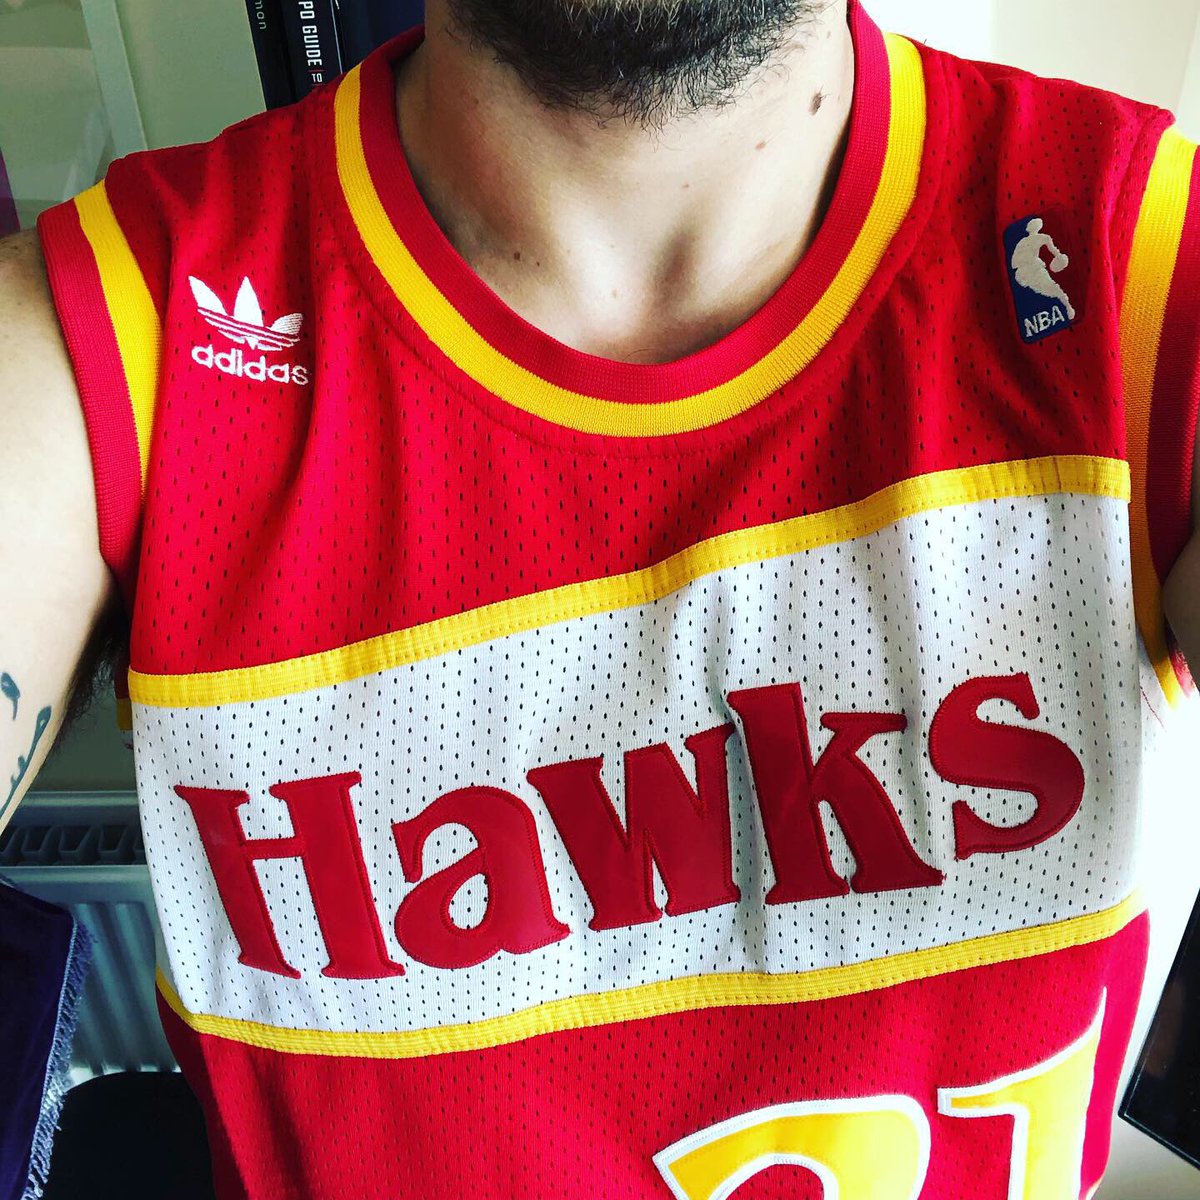  @ATLHawks Home Jersey, 1982-92Adidas, official replicaPersonalised:  #DominiqueWilkins 21 Can you believe how quickly the weather set itself to autumn mode? Here’s me sporting my classic Hawks jersey in one of the last days of summer... #AtlantaHawksJersey  #NBAJersey